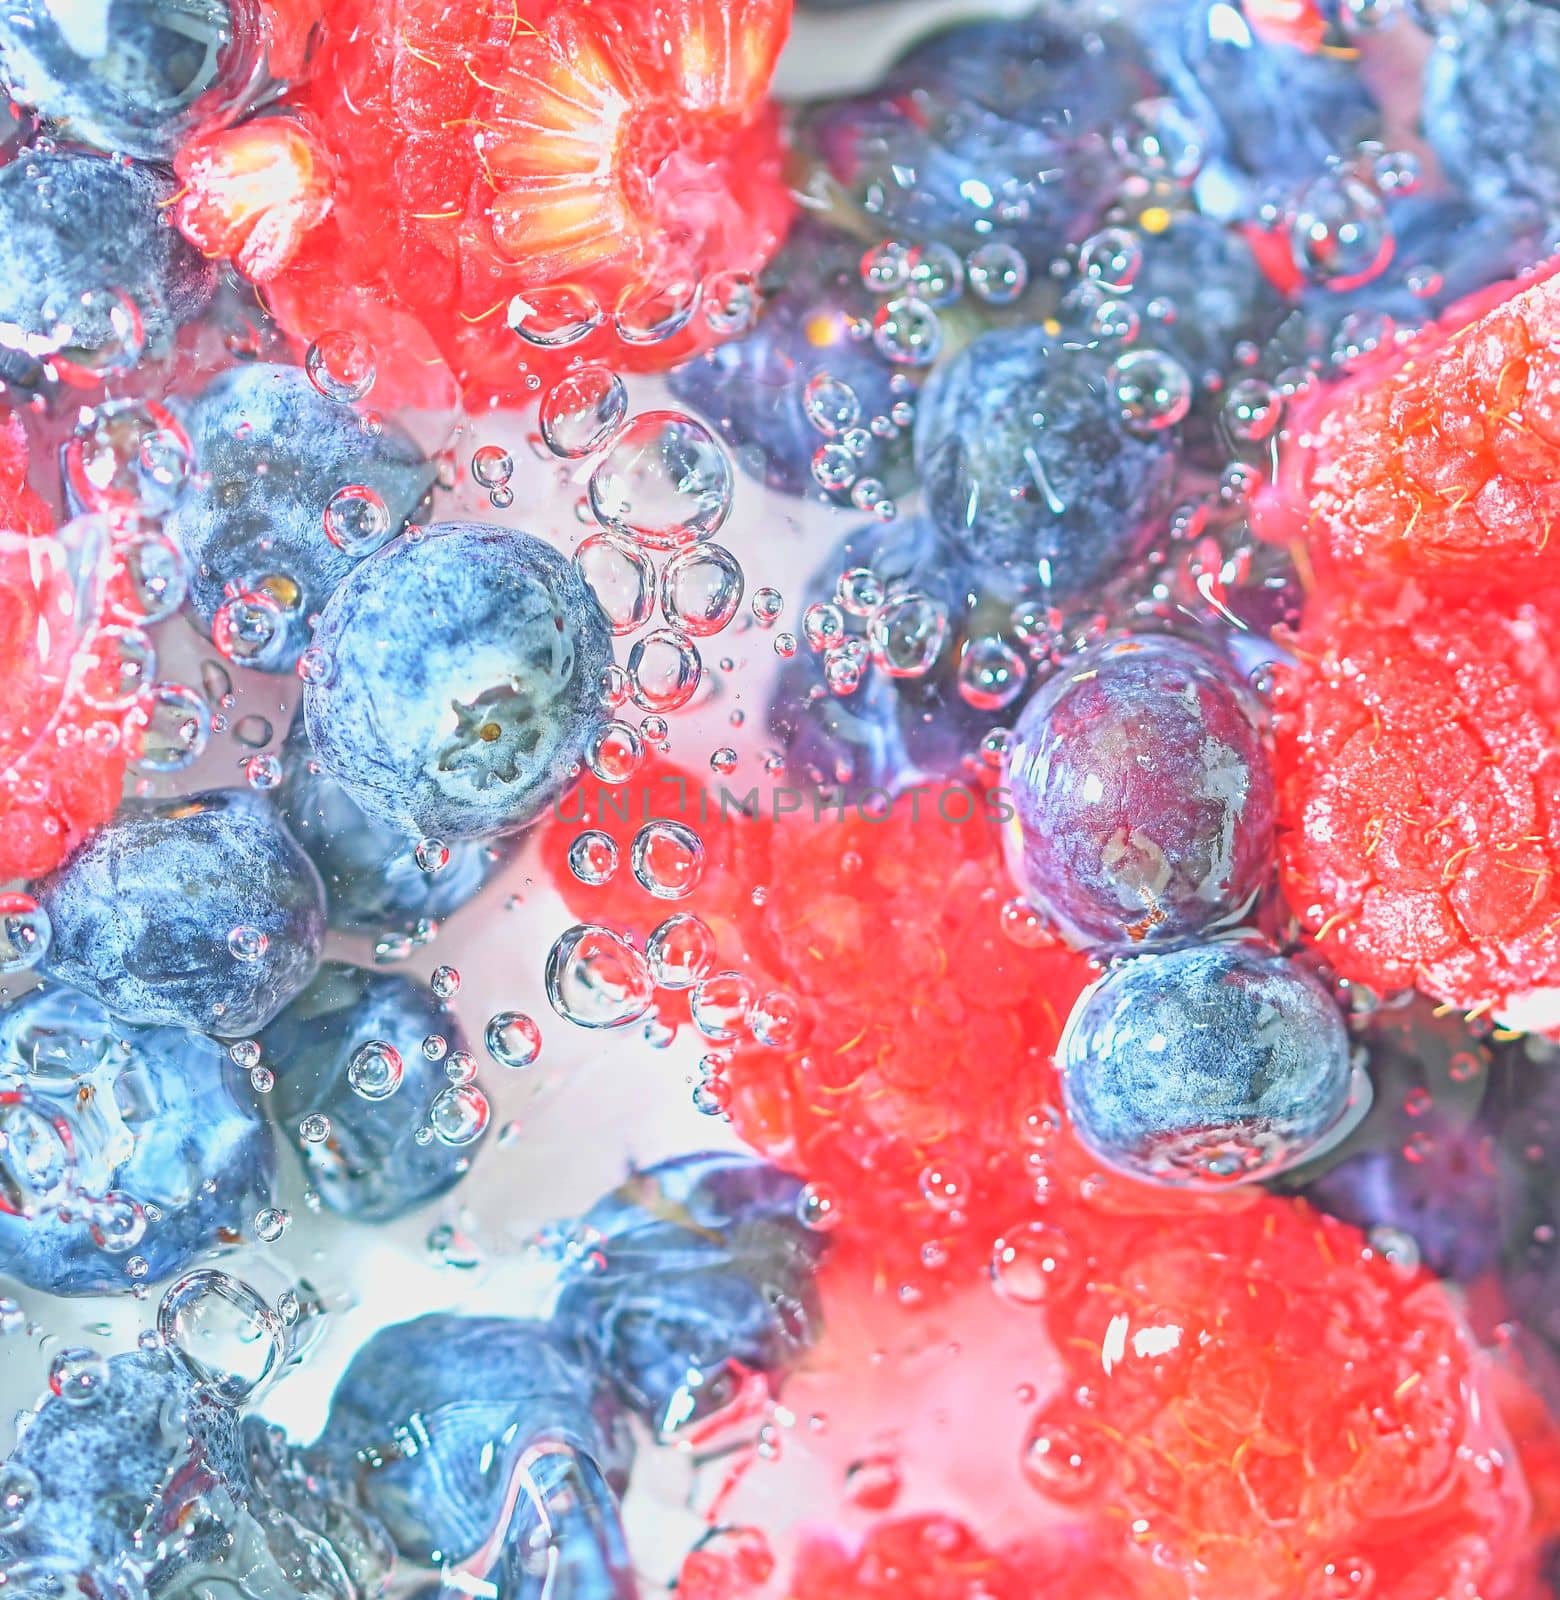 Water with fresh berries, close-up. Close-up view of the blueberries and raspberries in water background. Texture of bilberries and raspberries with macro bubbles on the glass wall. Flat design, top view. Horizontal image. Defocused by roman_nerud